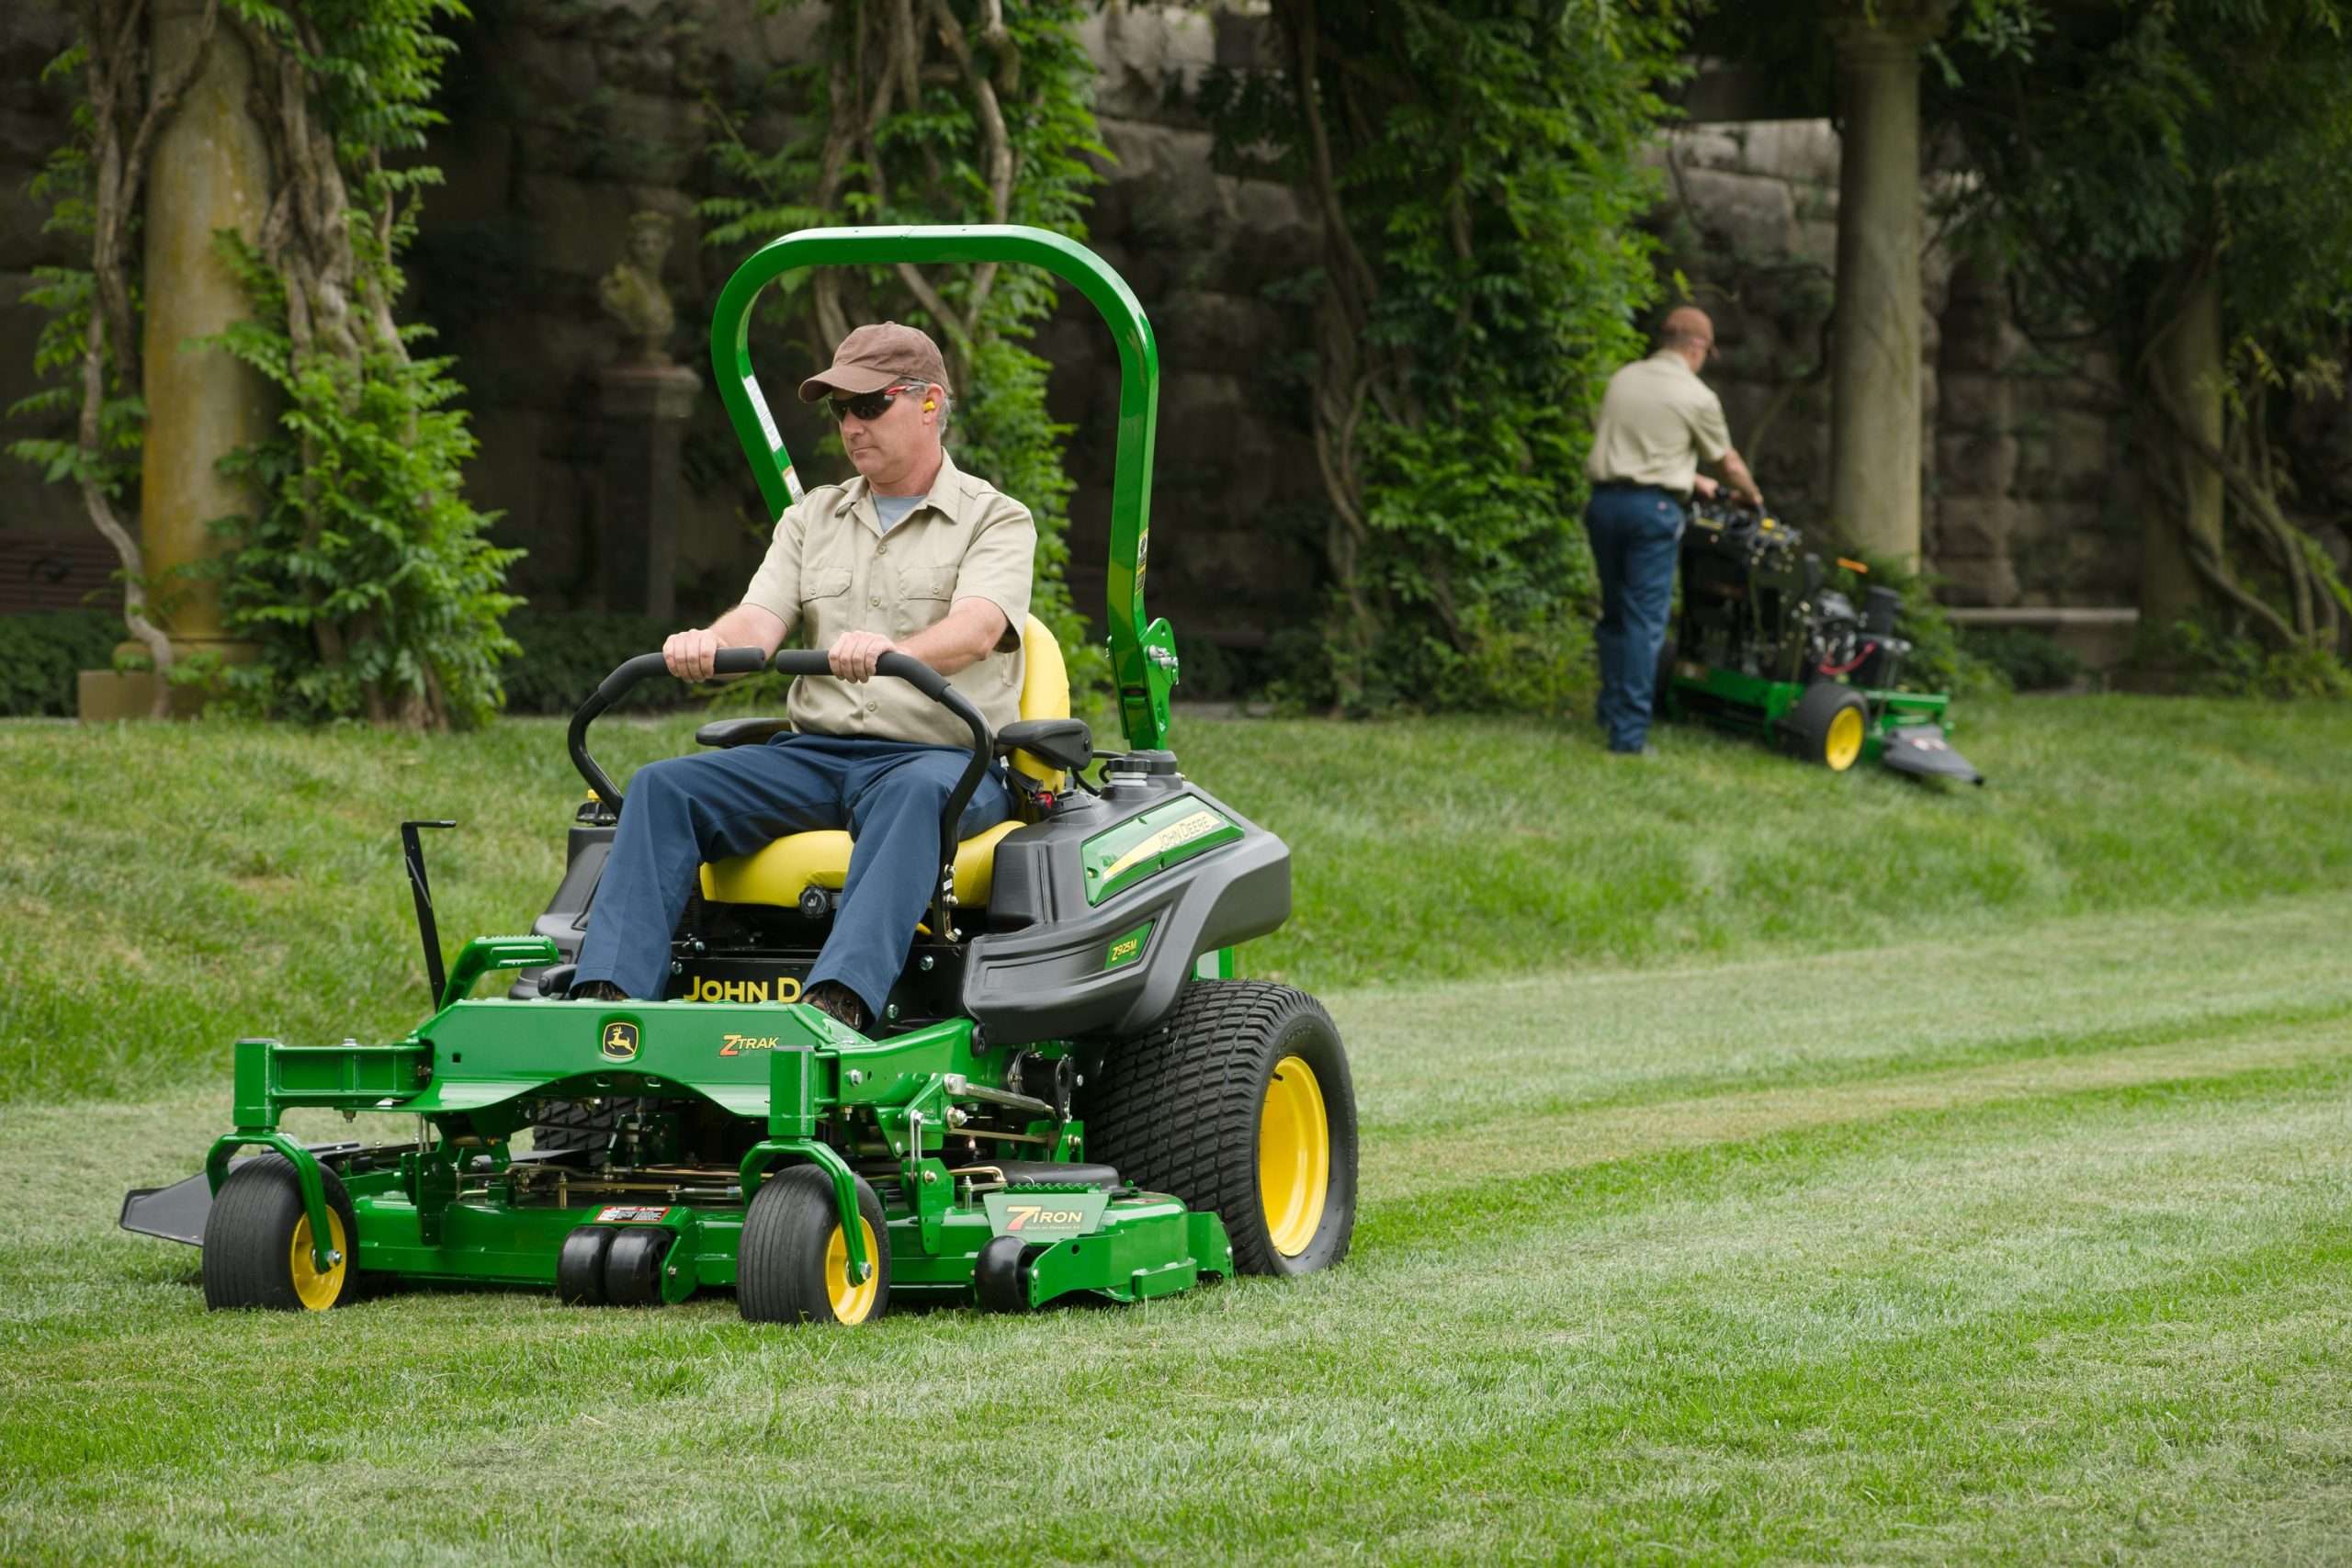 5 Best Riding Mower For The Money